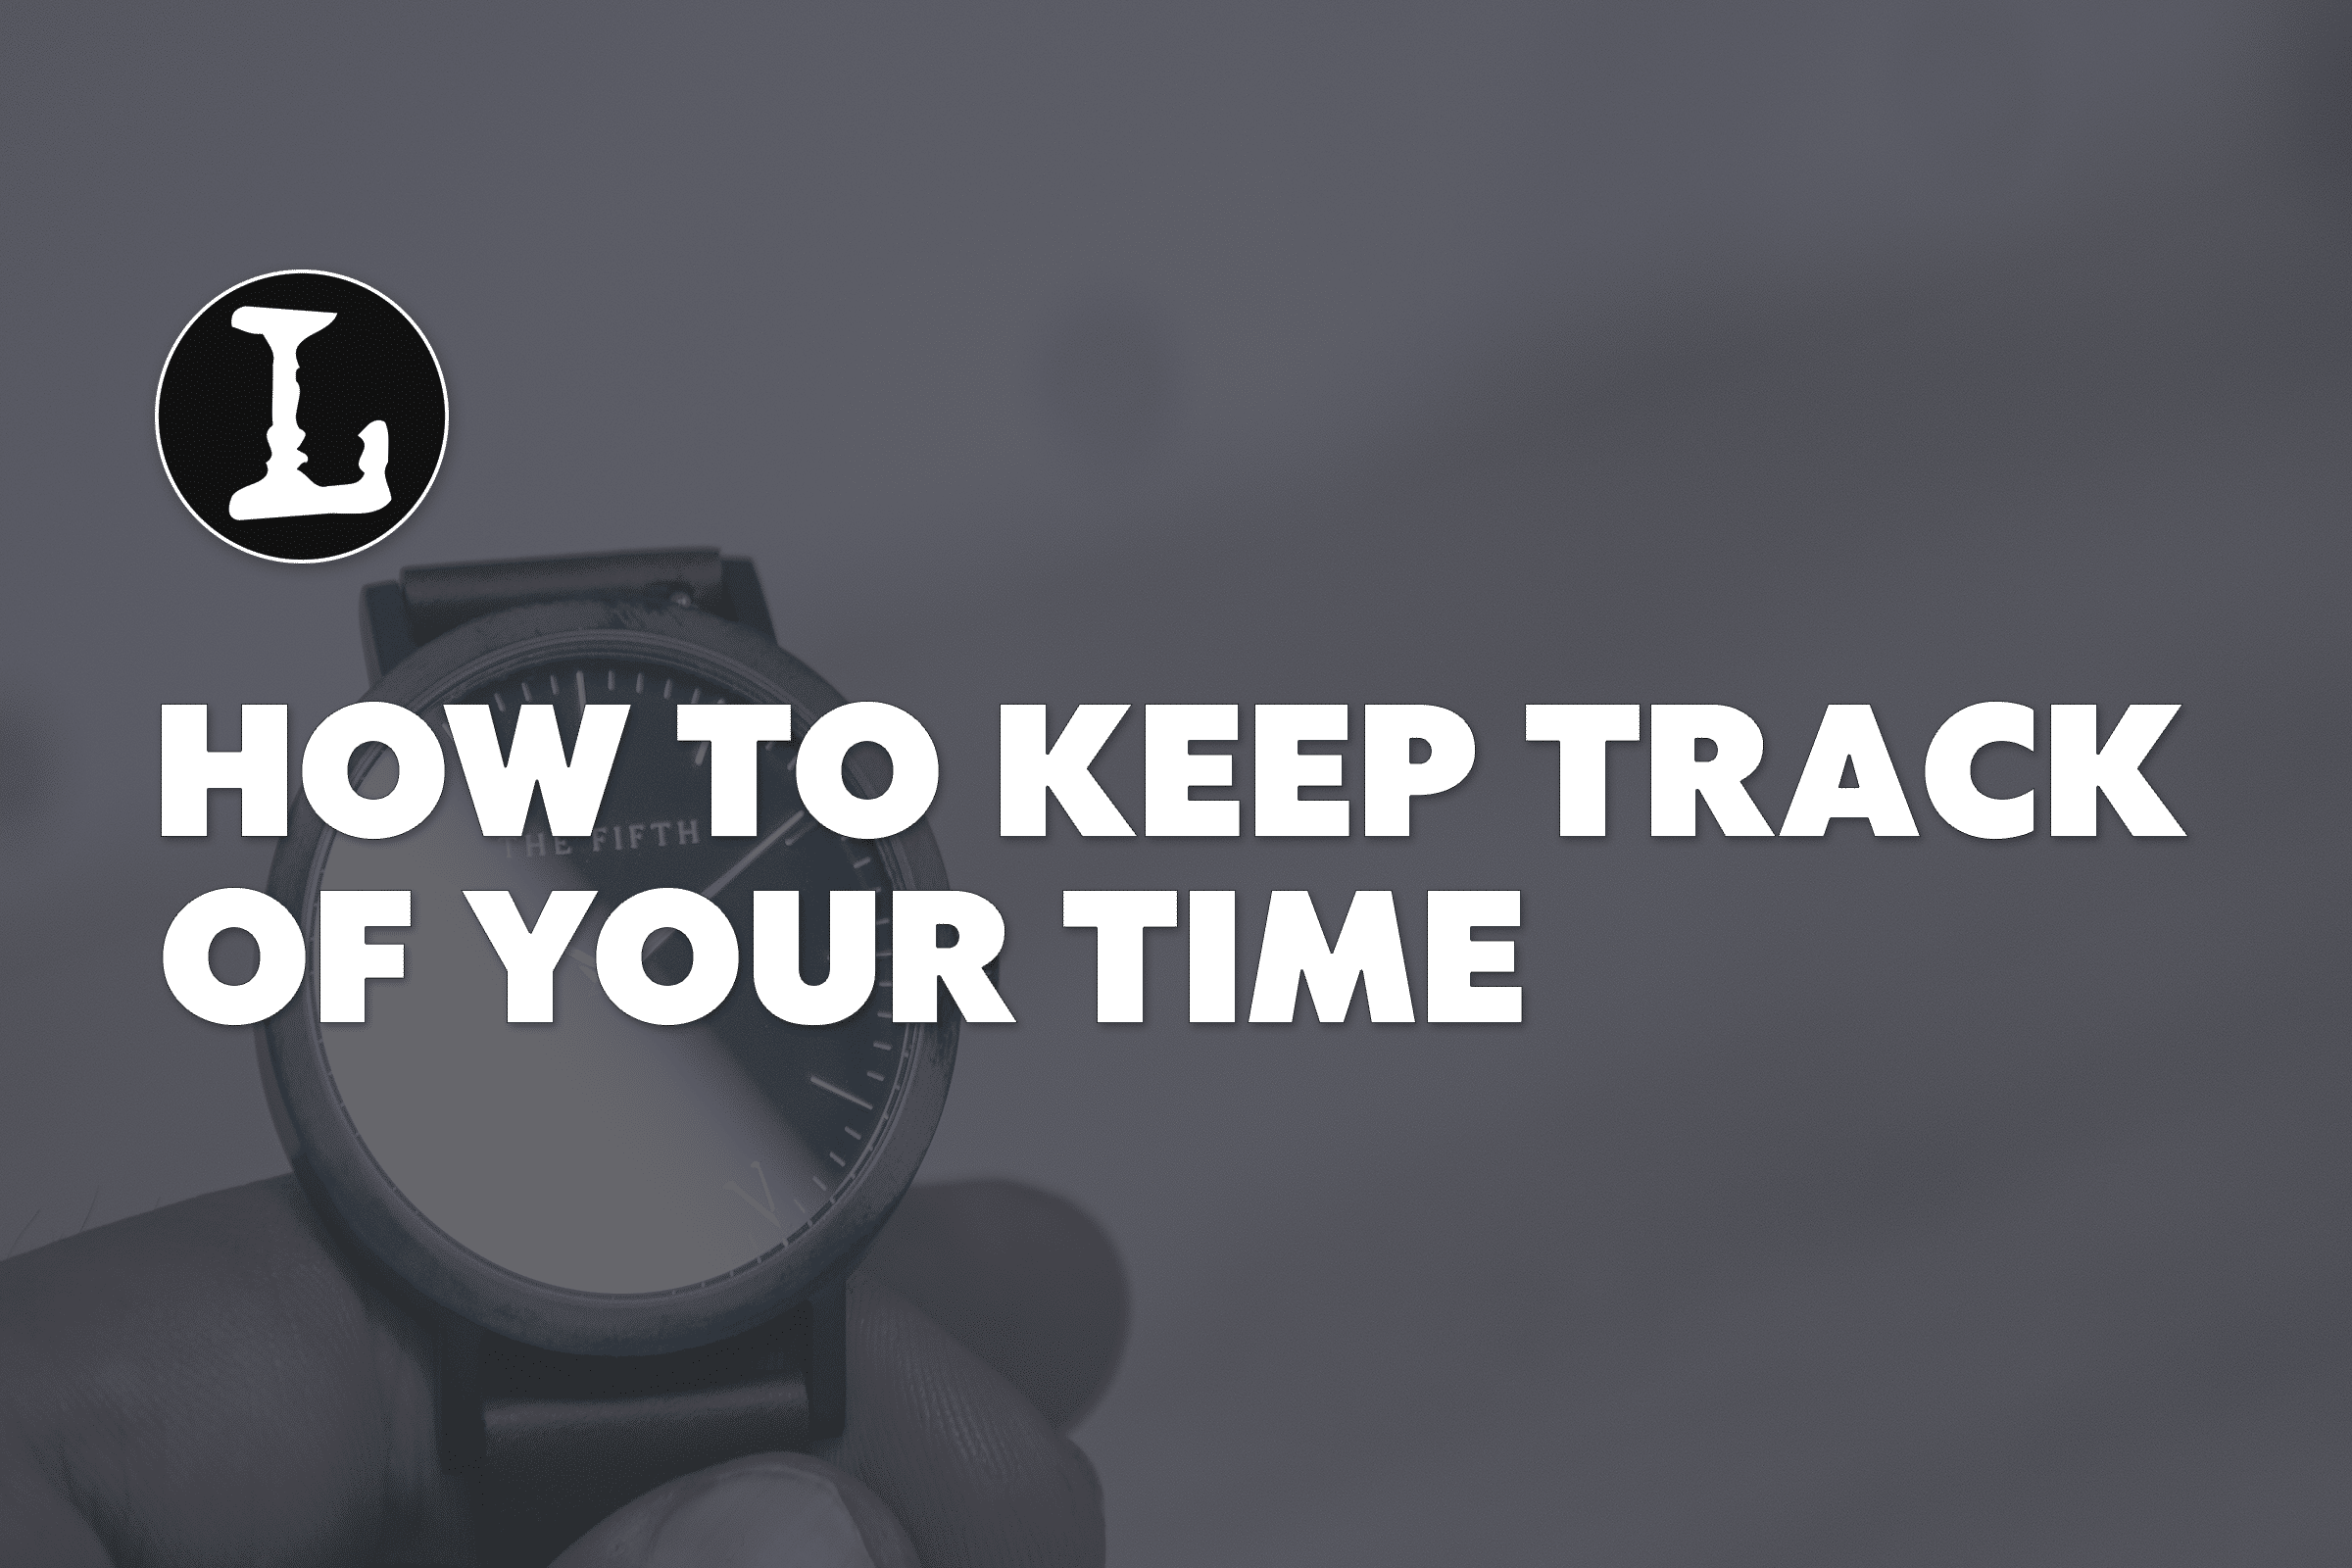 A hand is holding a watch. Text overlayed the image: How to keep track of your time.